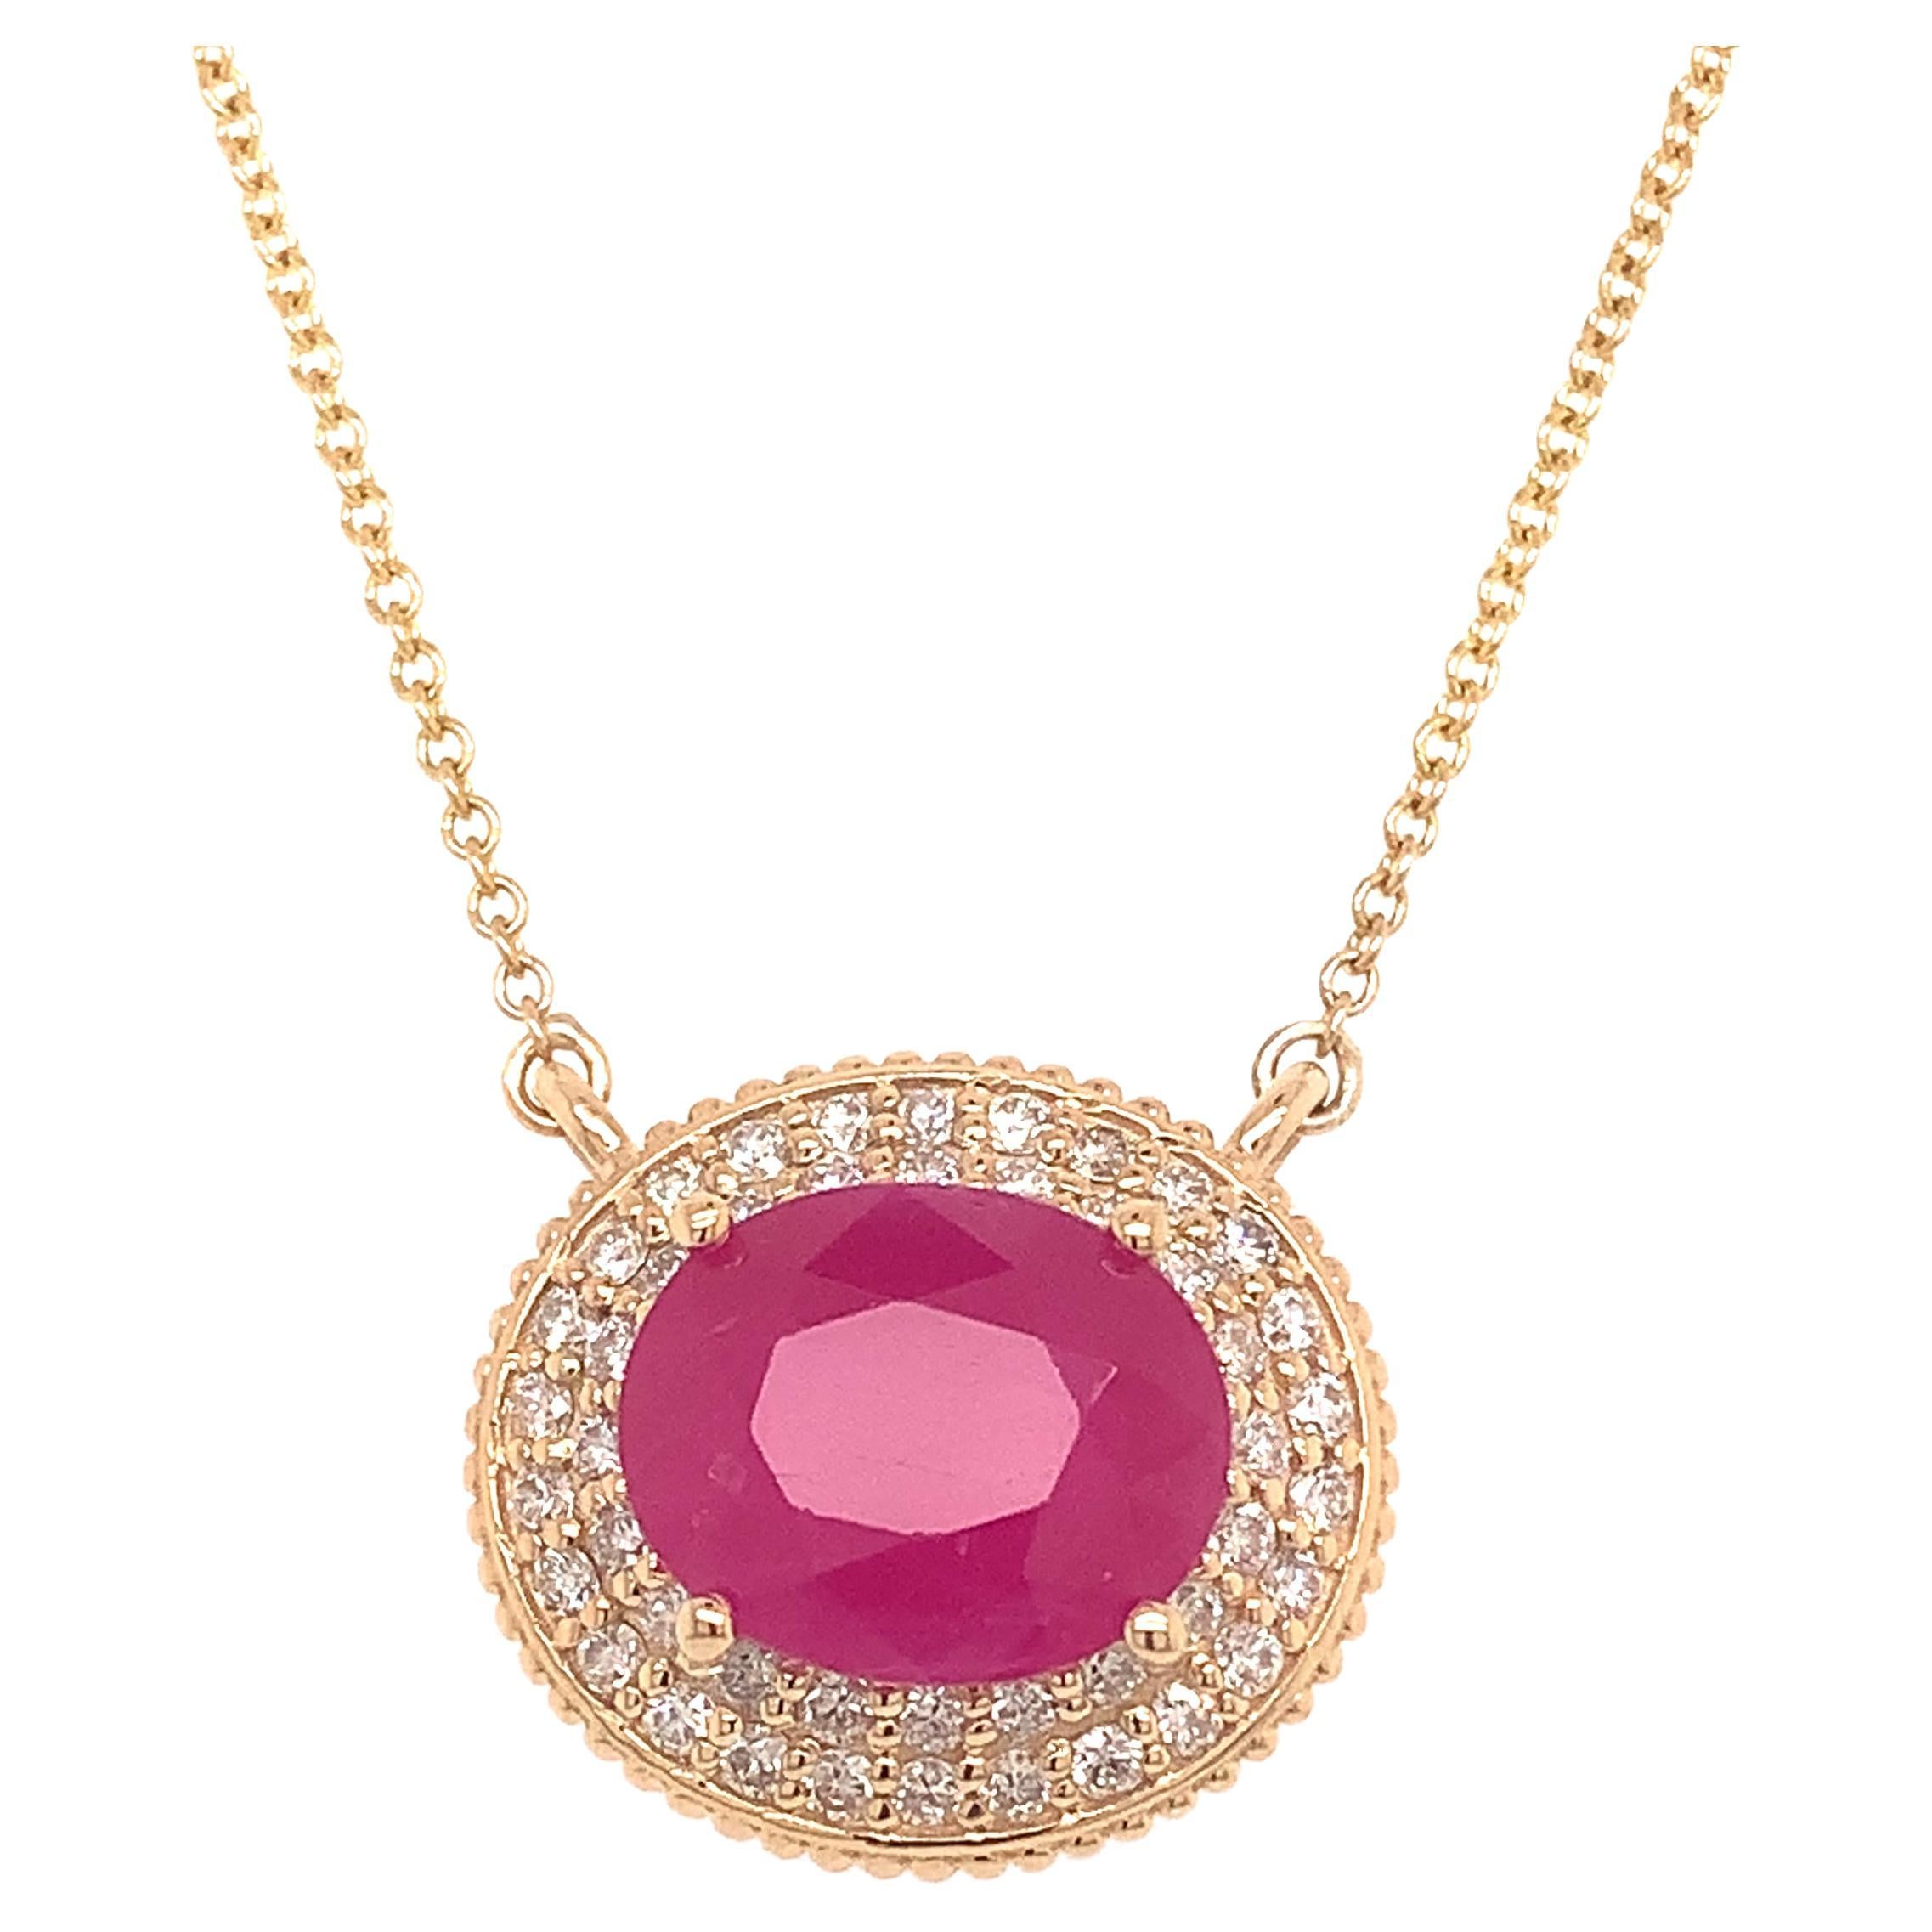 Ruby Diamond Necklace 14k Gold 18" 5.06 TCW Certified For Sale